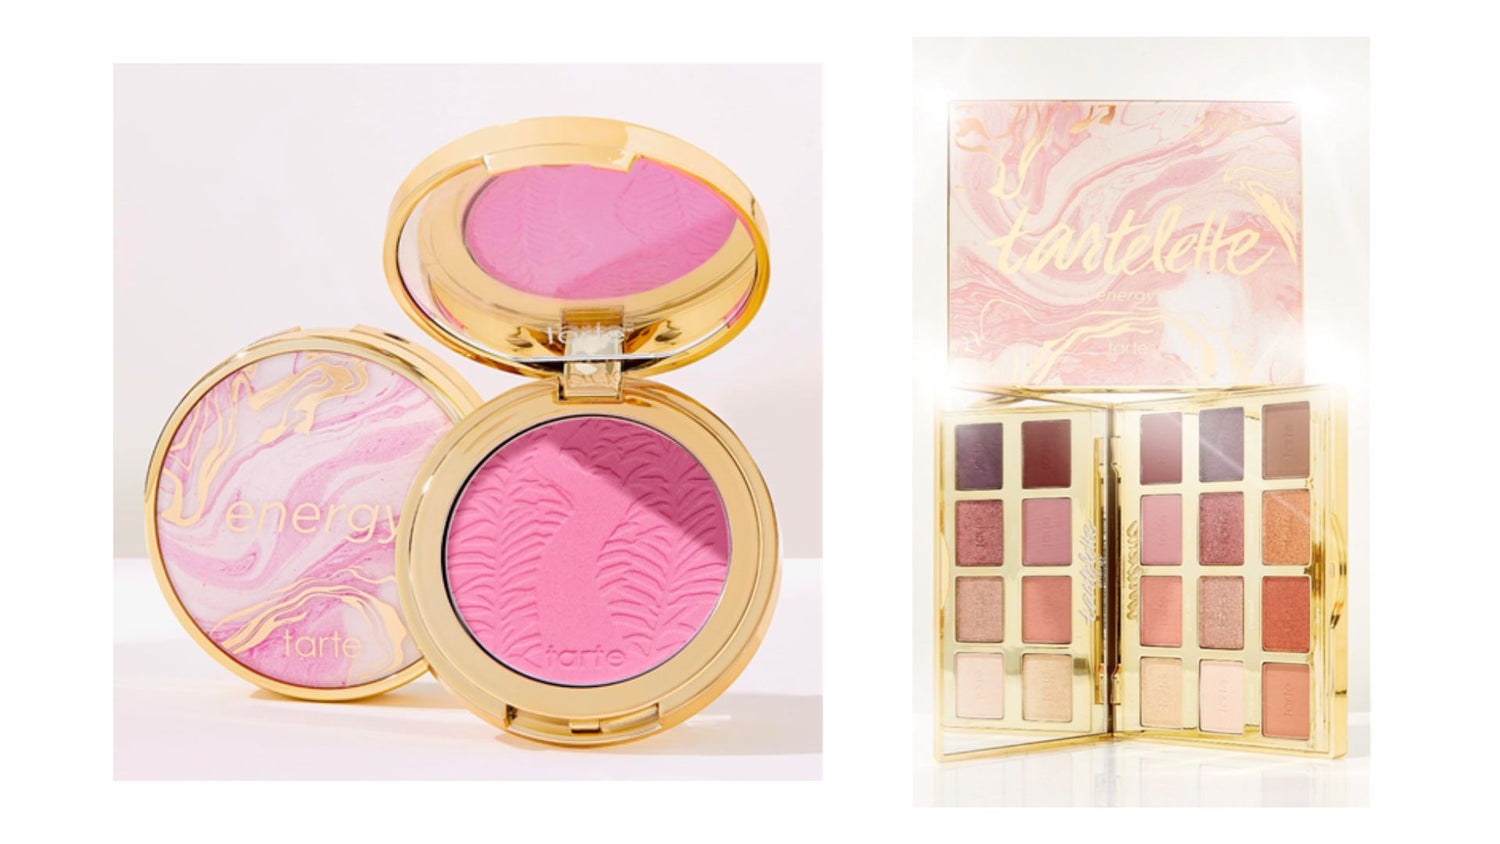 review, photos, ingredients, trends, makeup, 2022, 2023, tarte cosmetics, energy amazonian clay palette, amazonian clay skintuitive blush, best new high-end makeup products, amazonian clay, holiday makeup